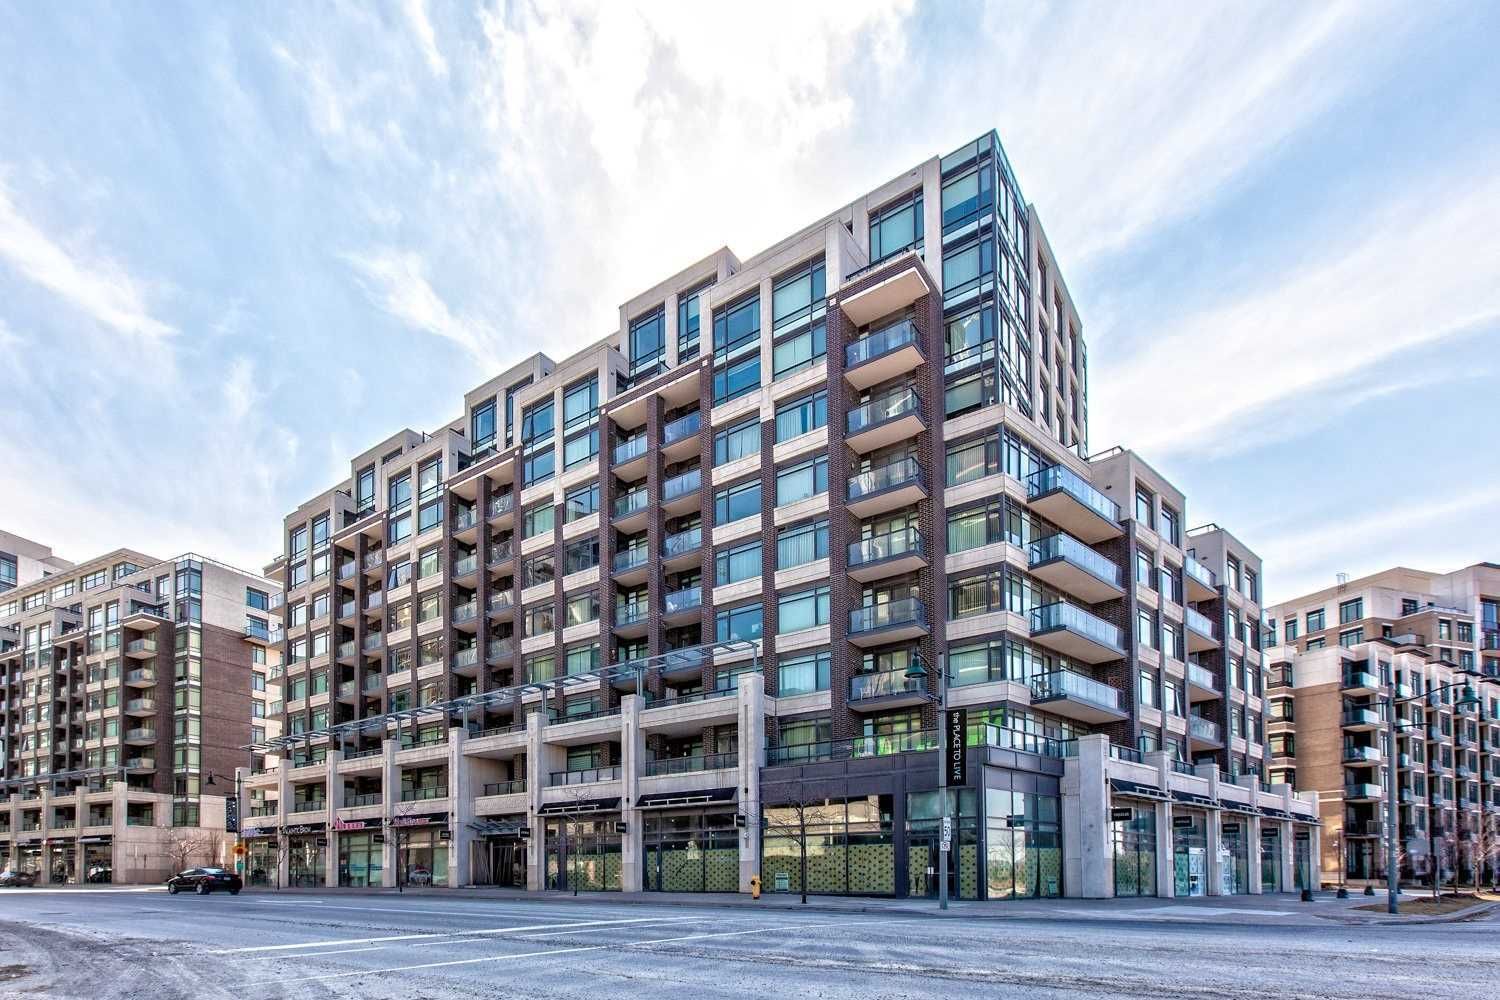 8130 Birchmount Rd. This condo at Nexus Condos is located in  Markham, Toronto - image #1 of 3 by Strata.ca